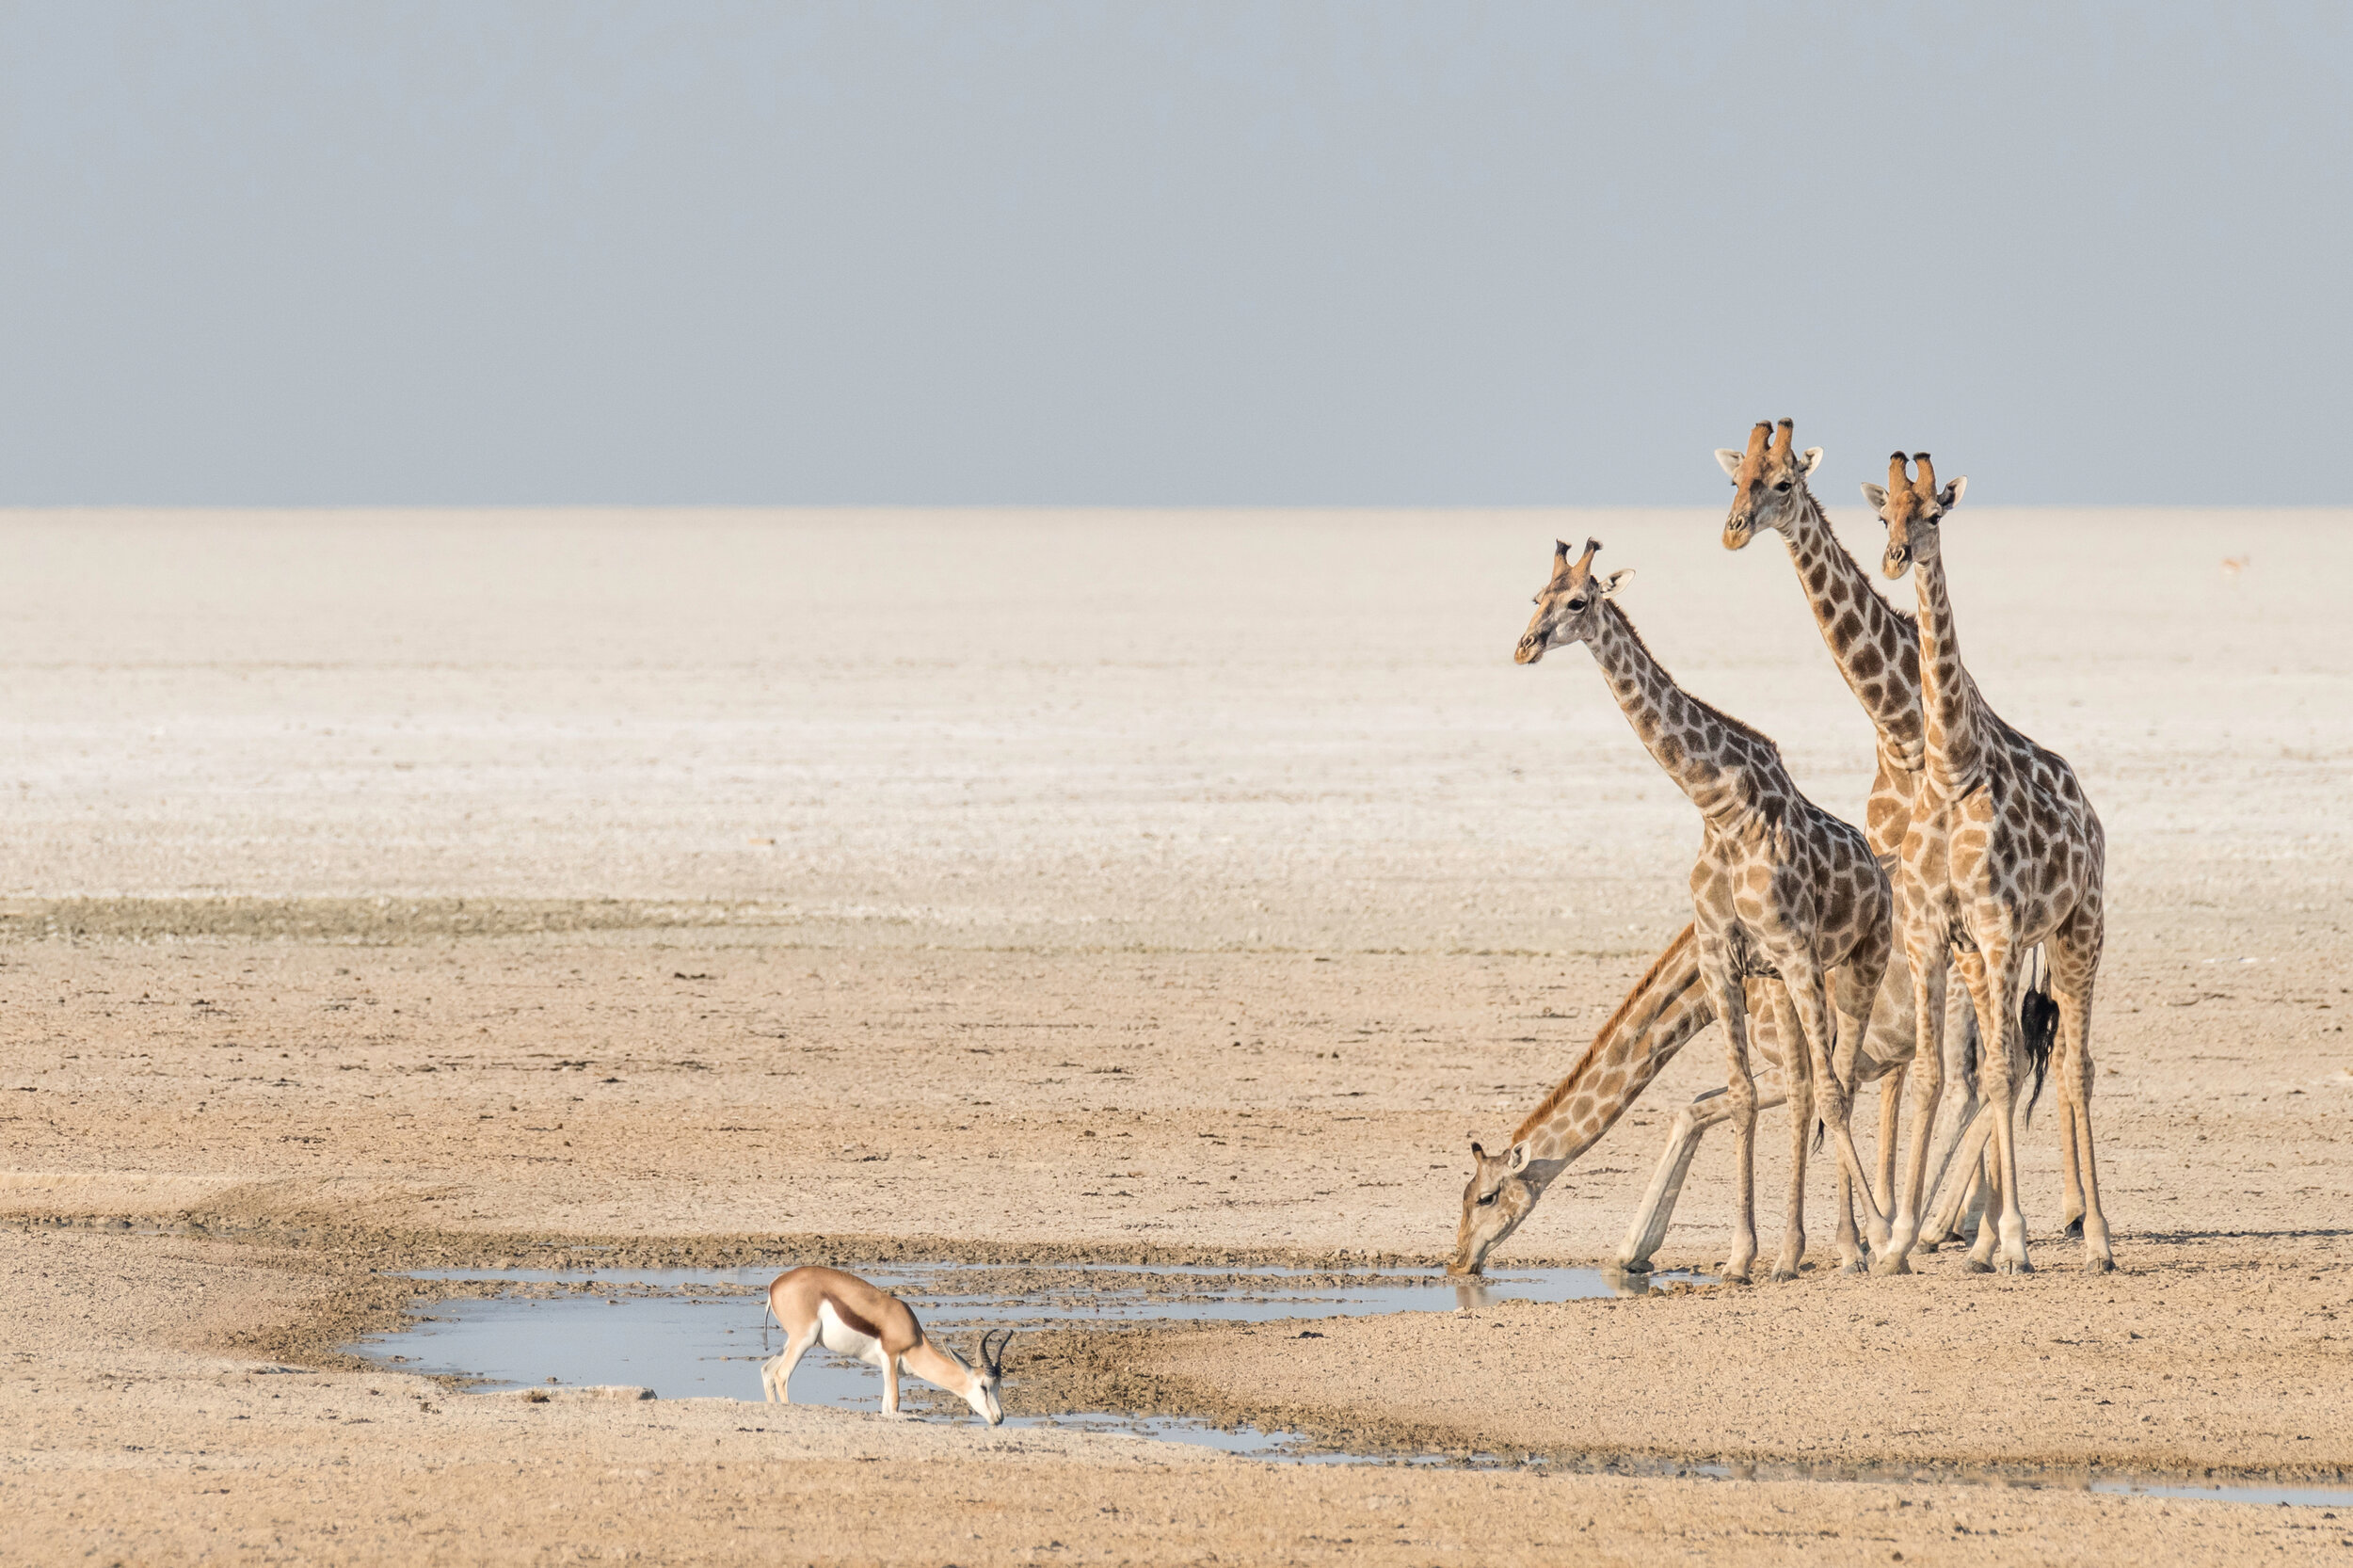 four giraffes standing and one drinking from waterhole in empty background